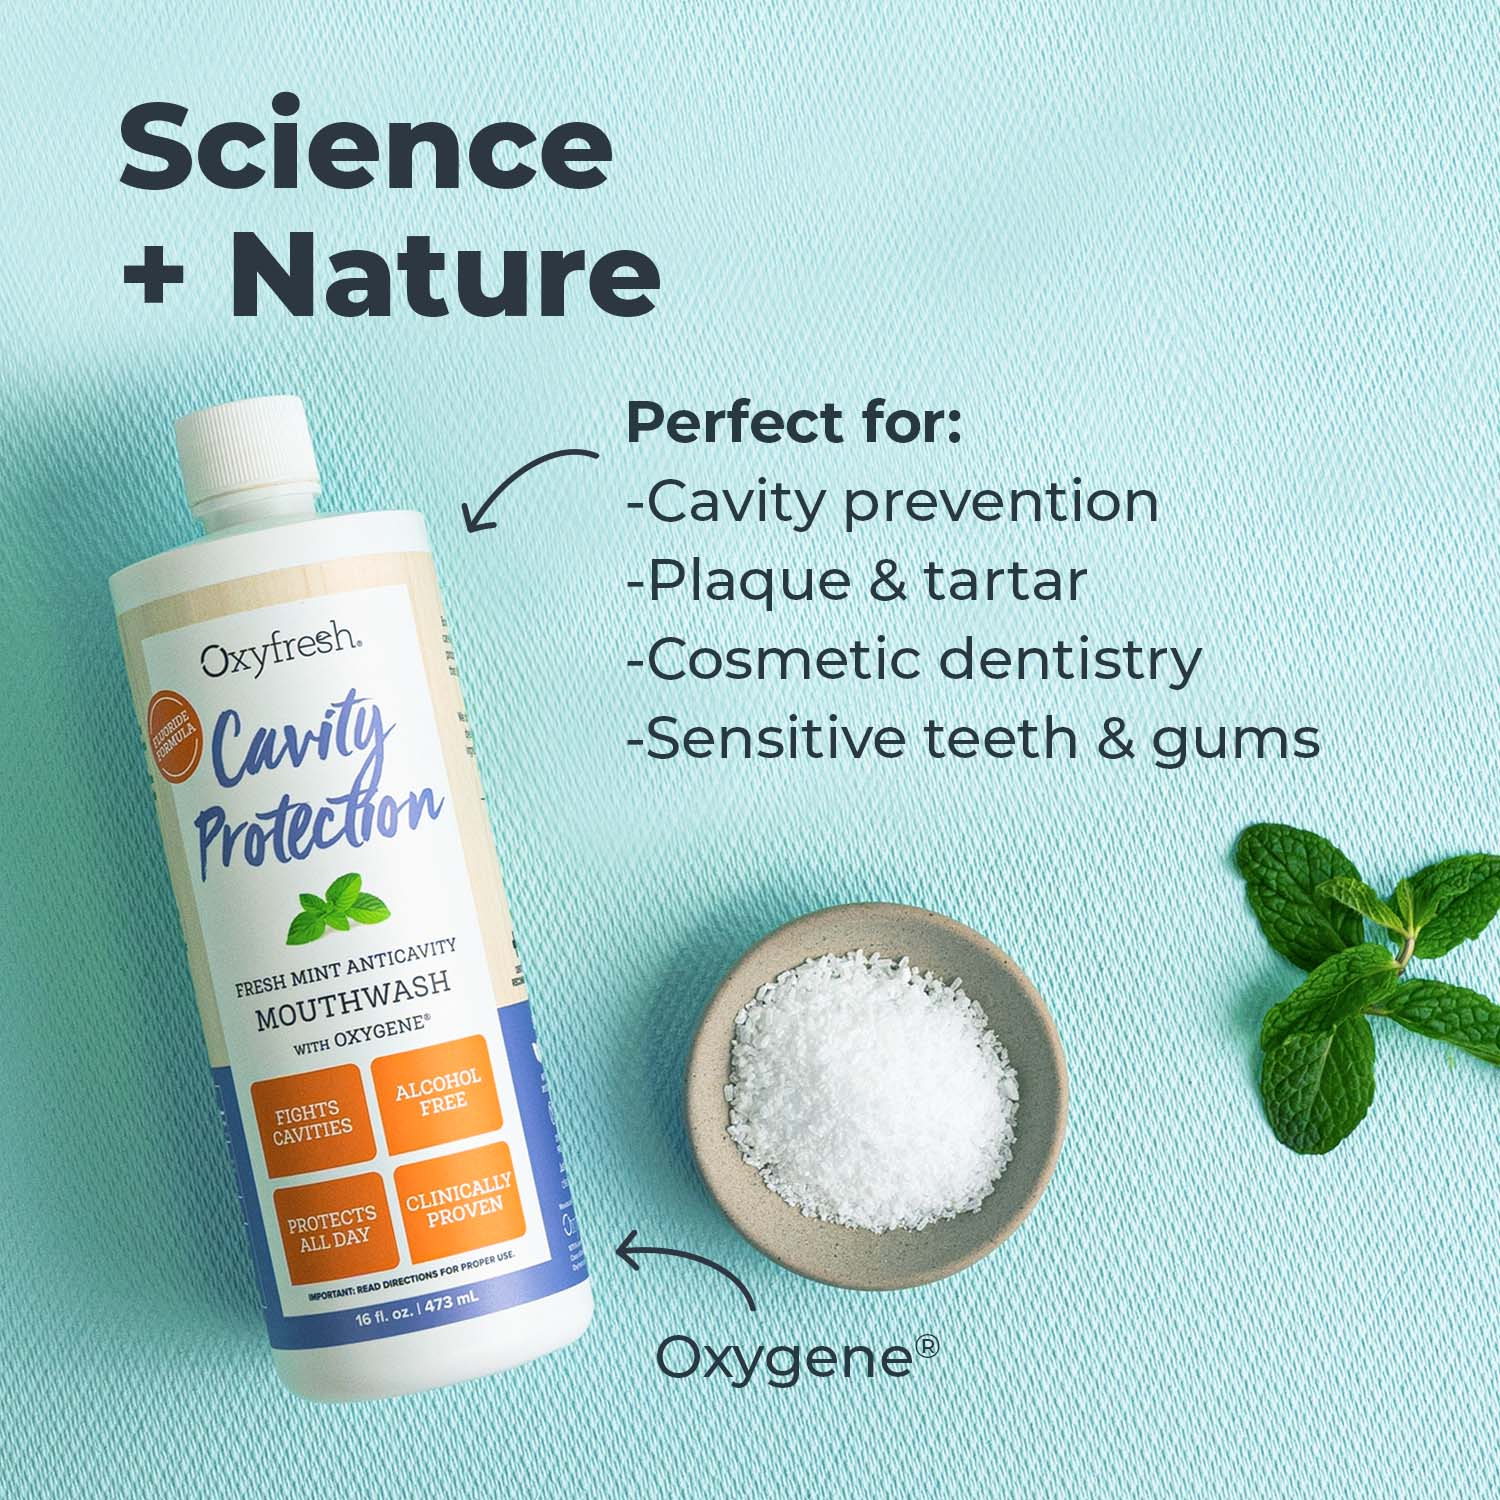 oxyfresh-cavity-protection-mouthwash-science-and-nature-perfect-for-cavity-prevention-plaque-and-tartar-cosmetic-dentistry-sensitive-teeth-and-gums